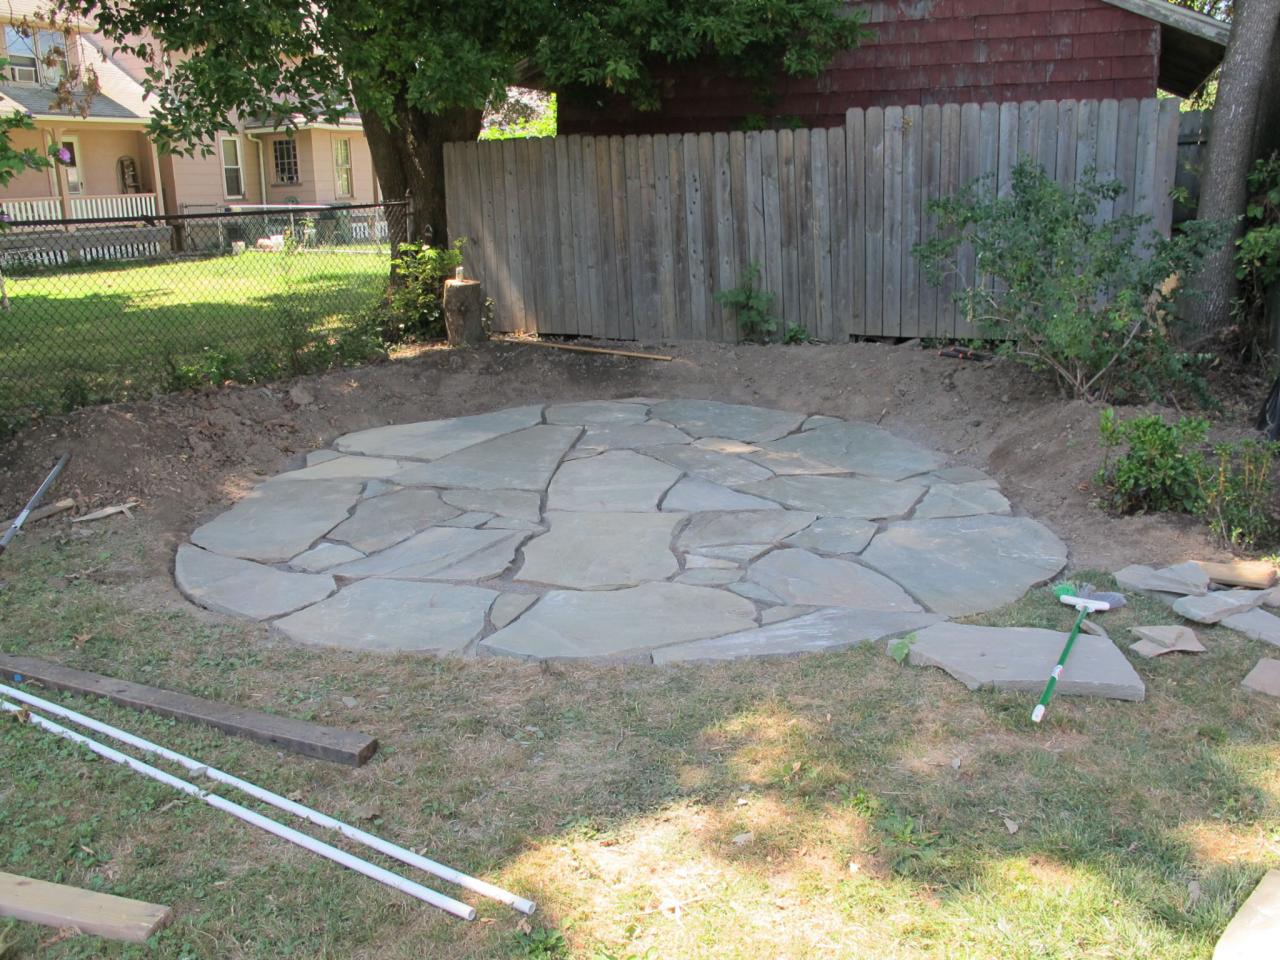 Image 50 of What To Put Between Patio Stones